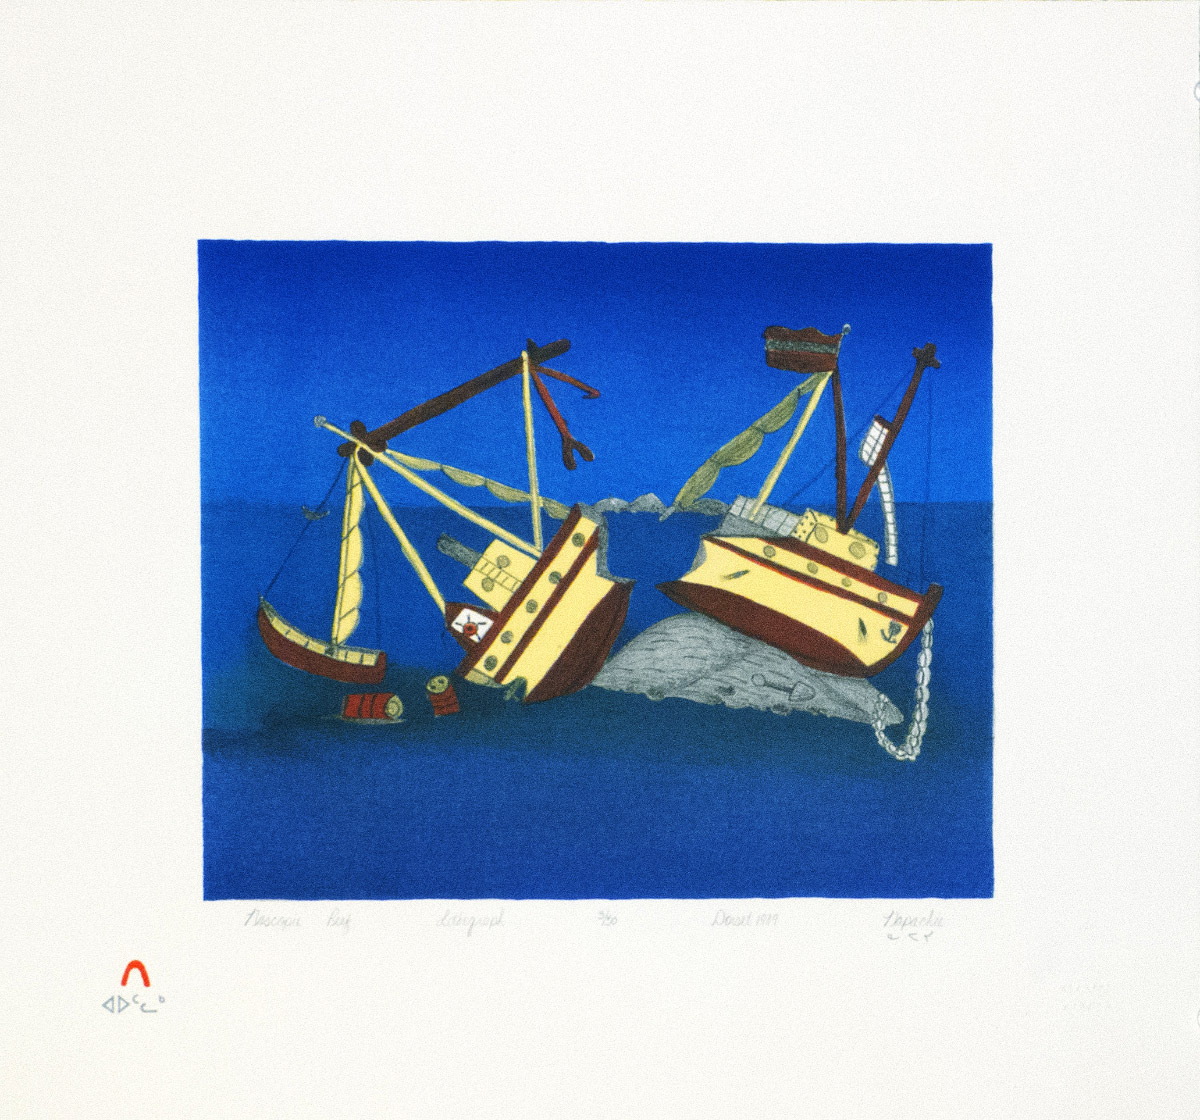 Napachie Pootoogook (Inuit, 1938 – 2002), Nascopie Reef, 1989. Lithograph, 17 x 19 inches. Edward J. Guarino Collection, Yonkers, New York.